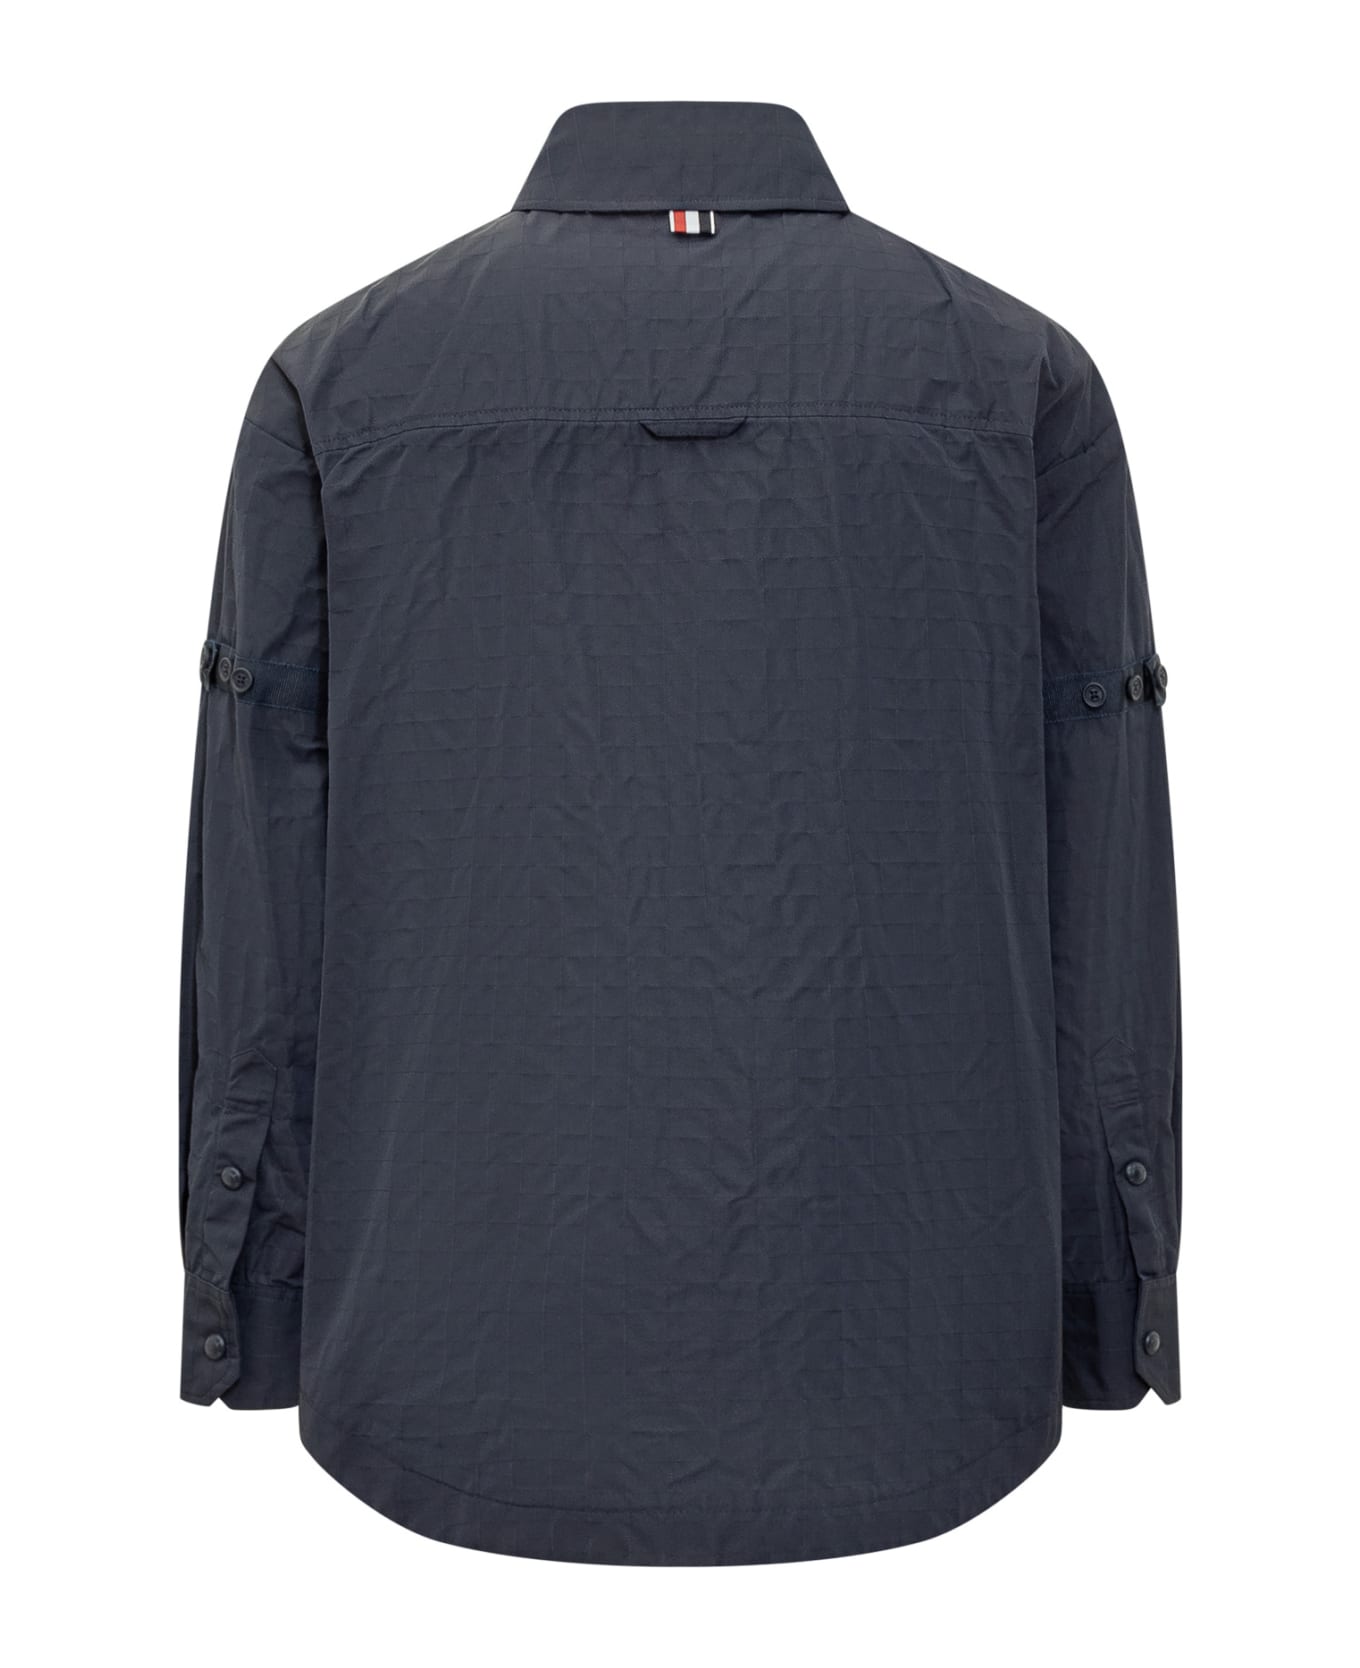 Thom Browne Oversize Shirt With Stitching - NAVY